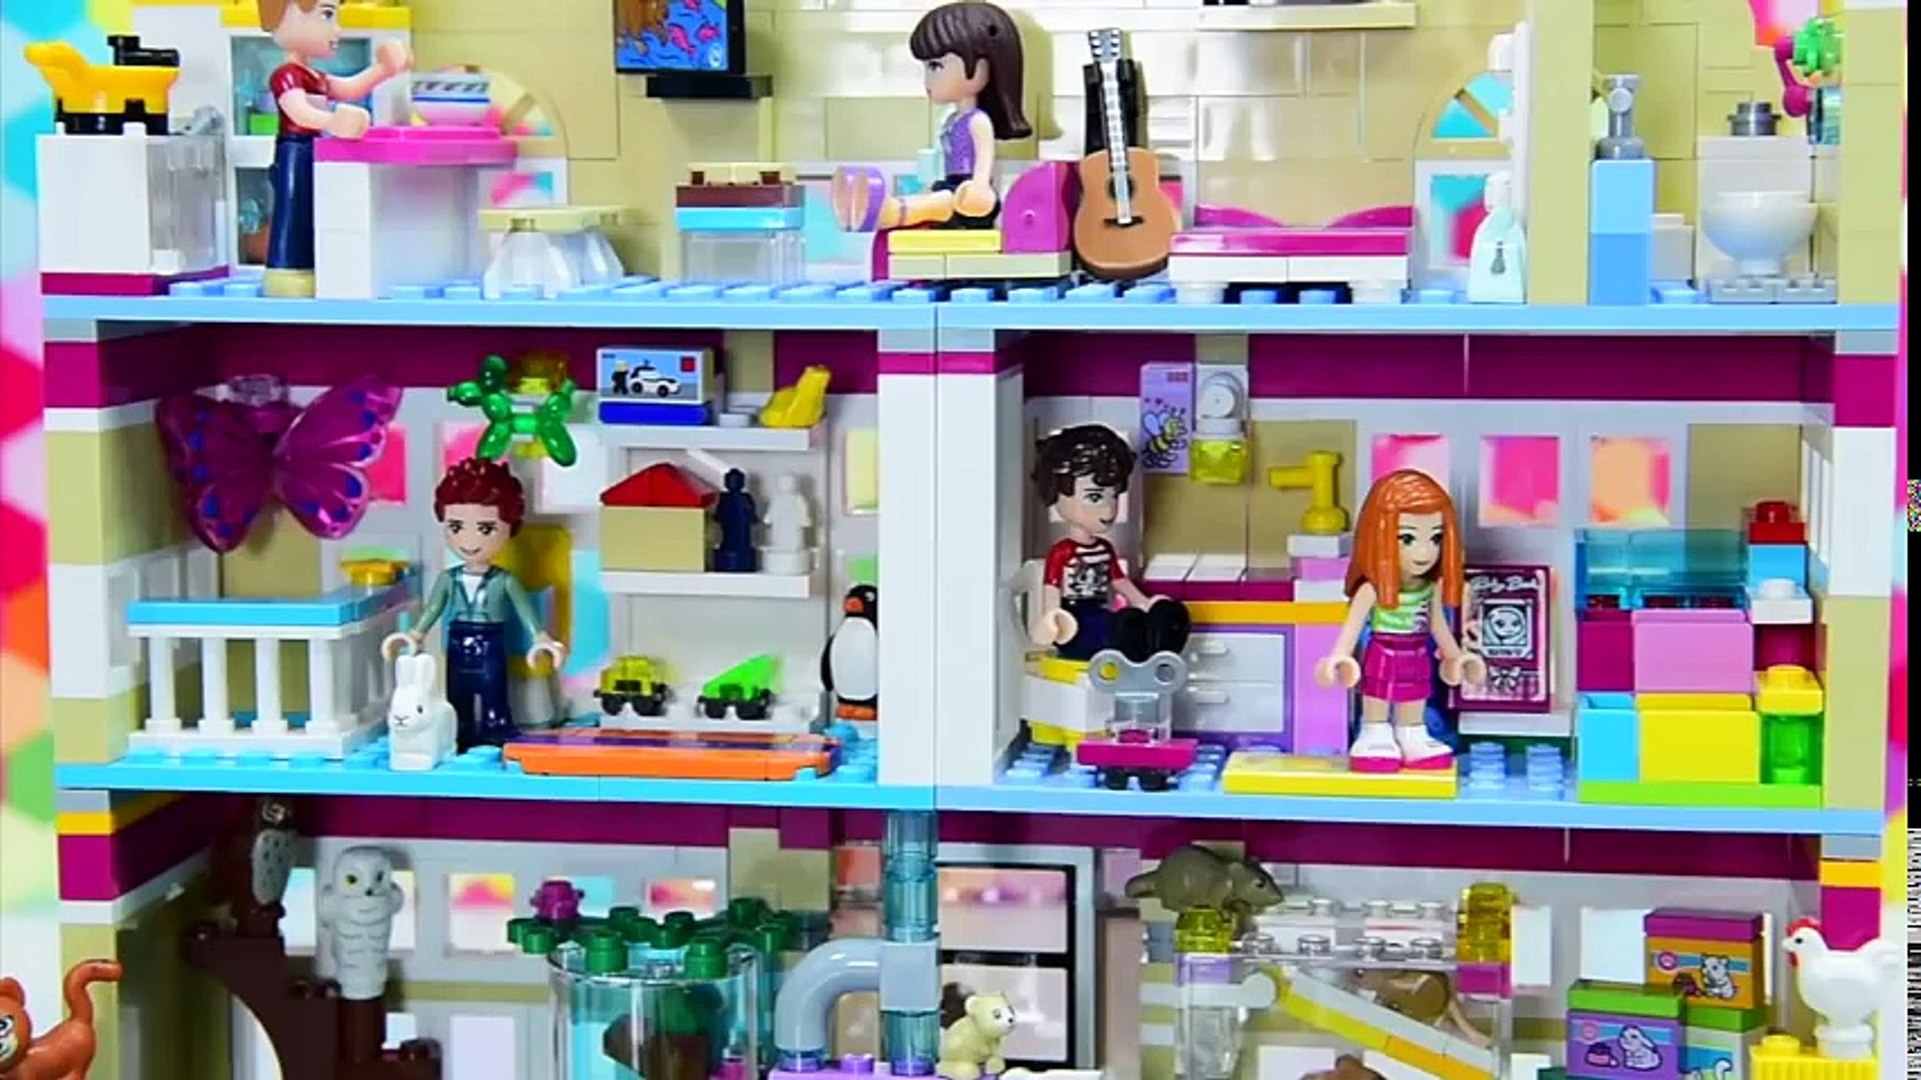 elliev toys lego friends sophie and henry house